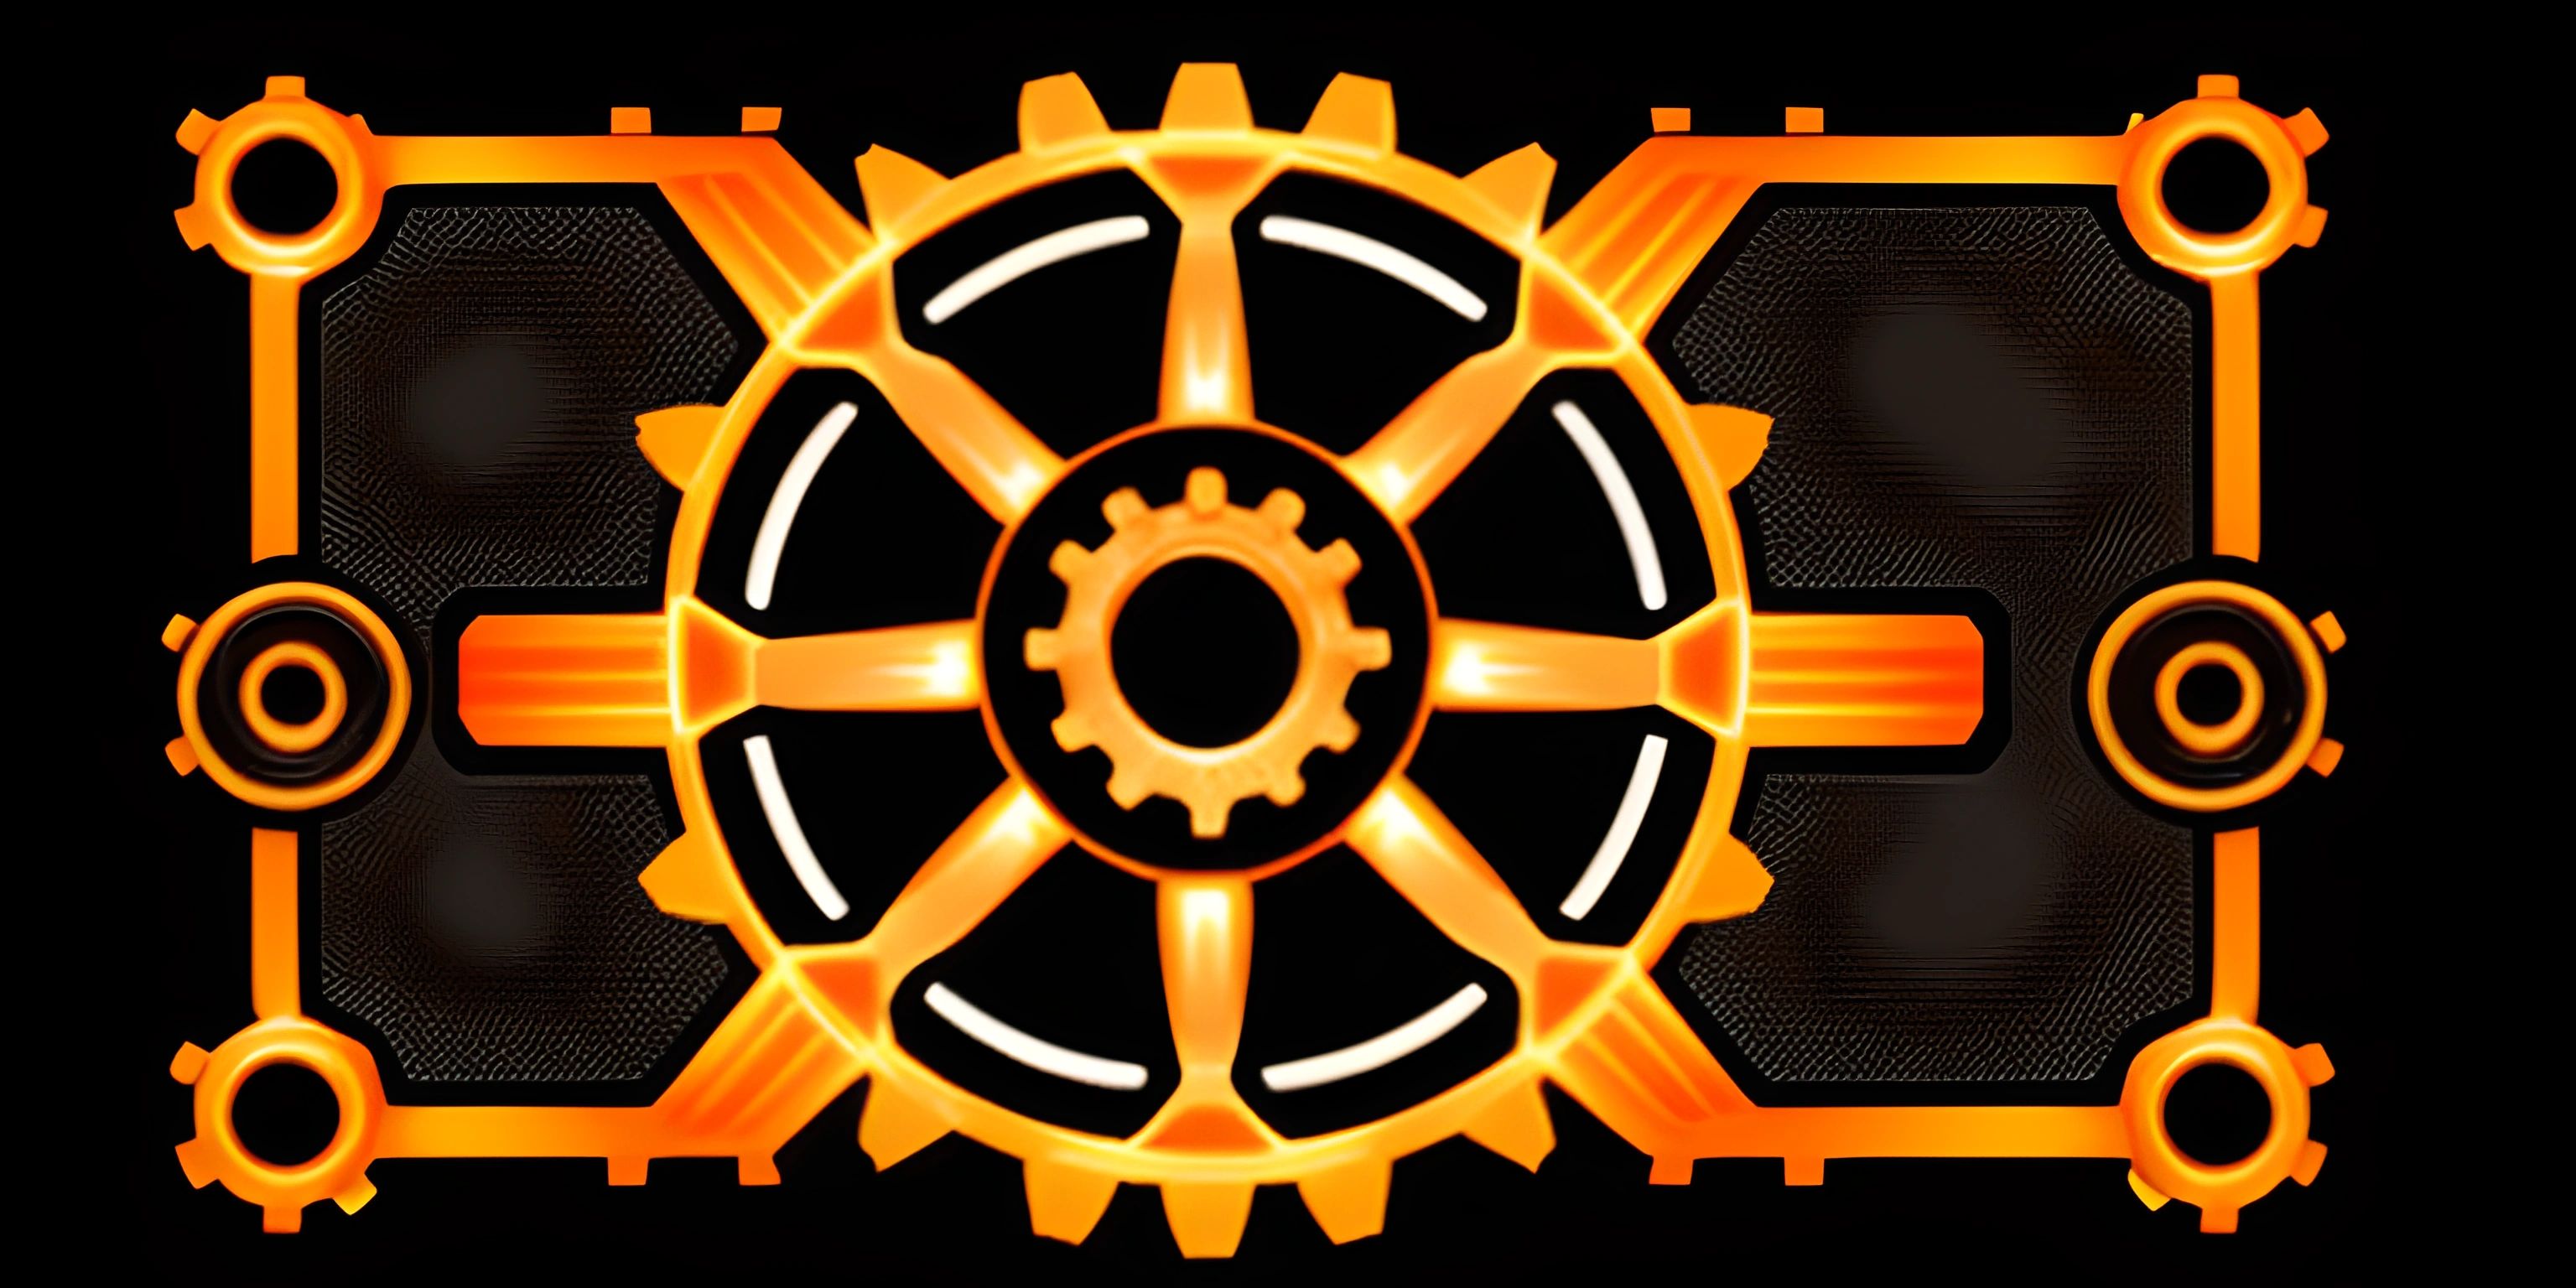 the image is a symbol of gears and gear wheels on black fabric, with light shines